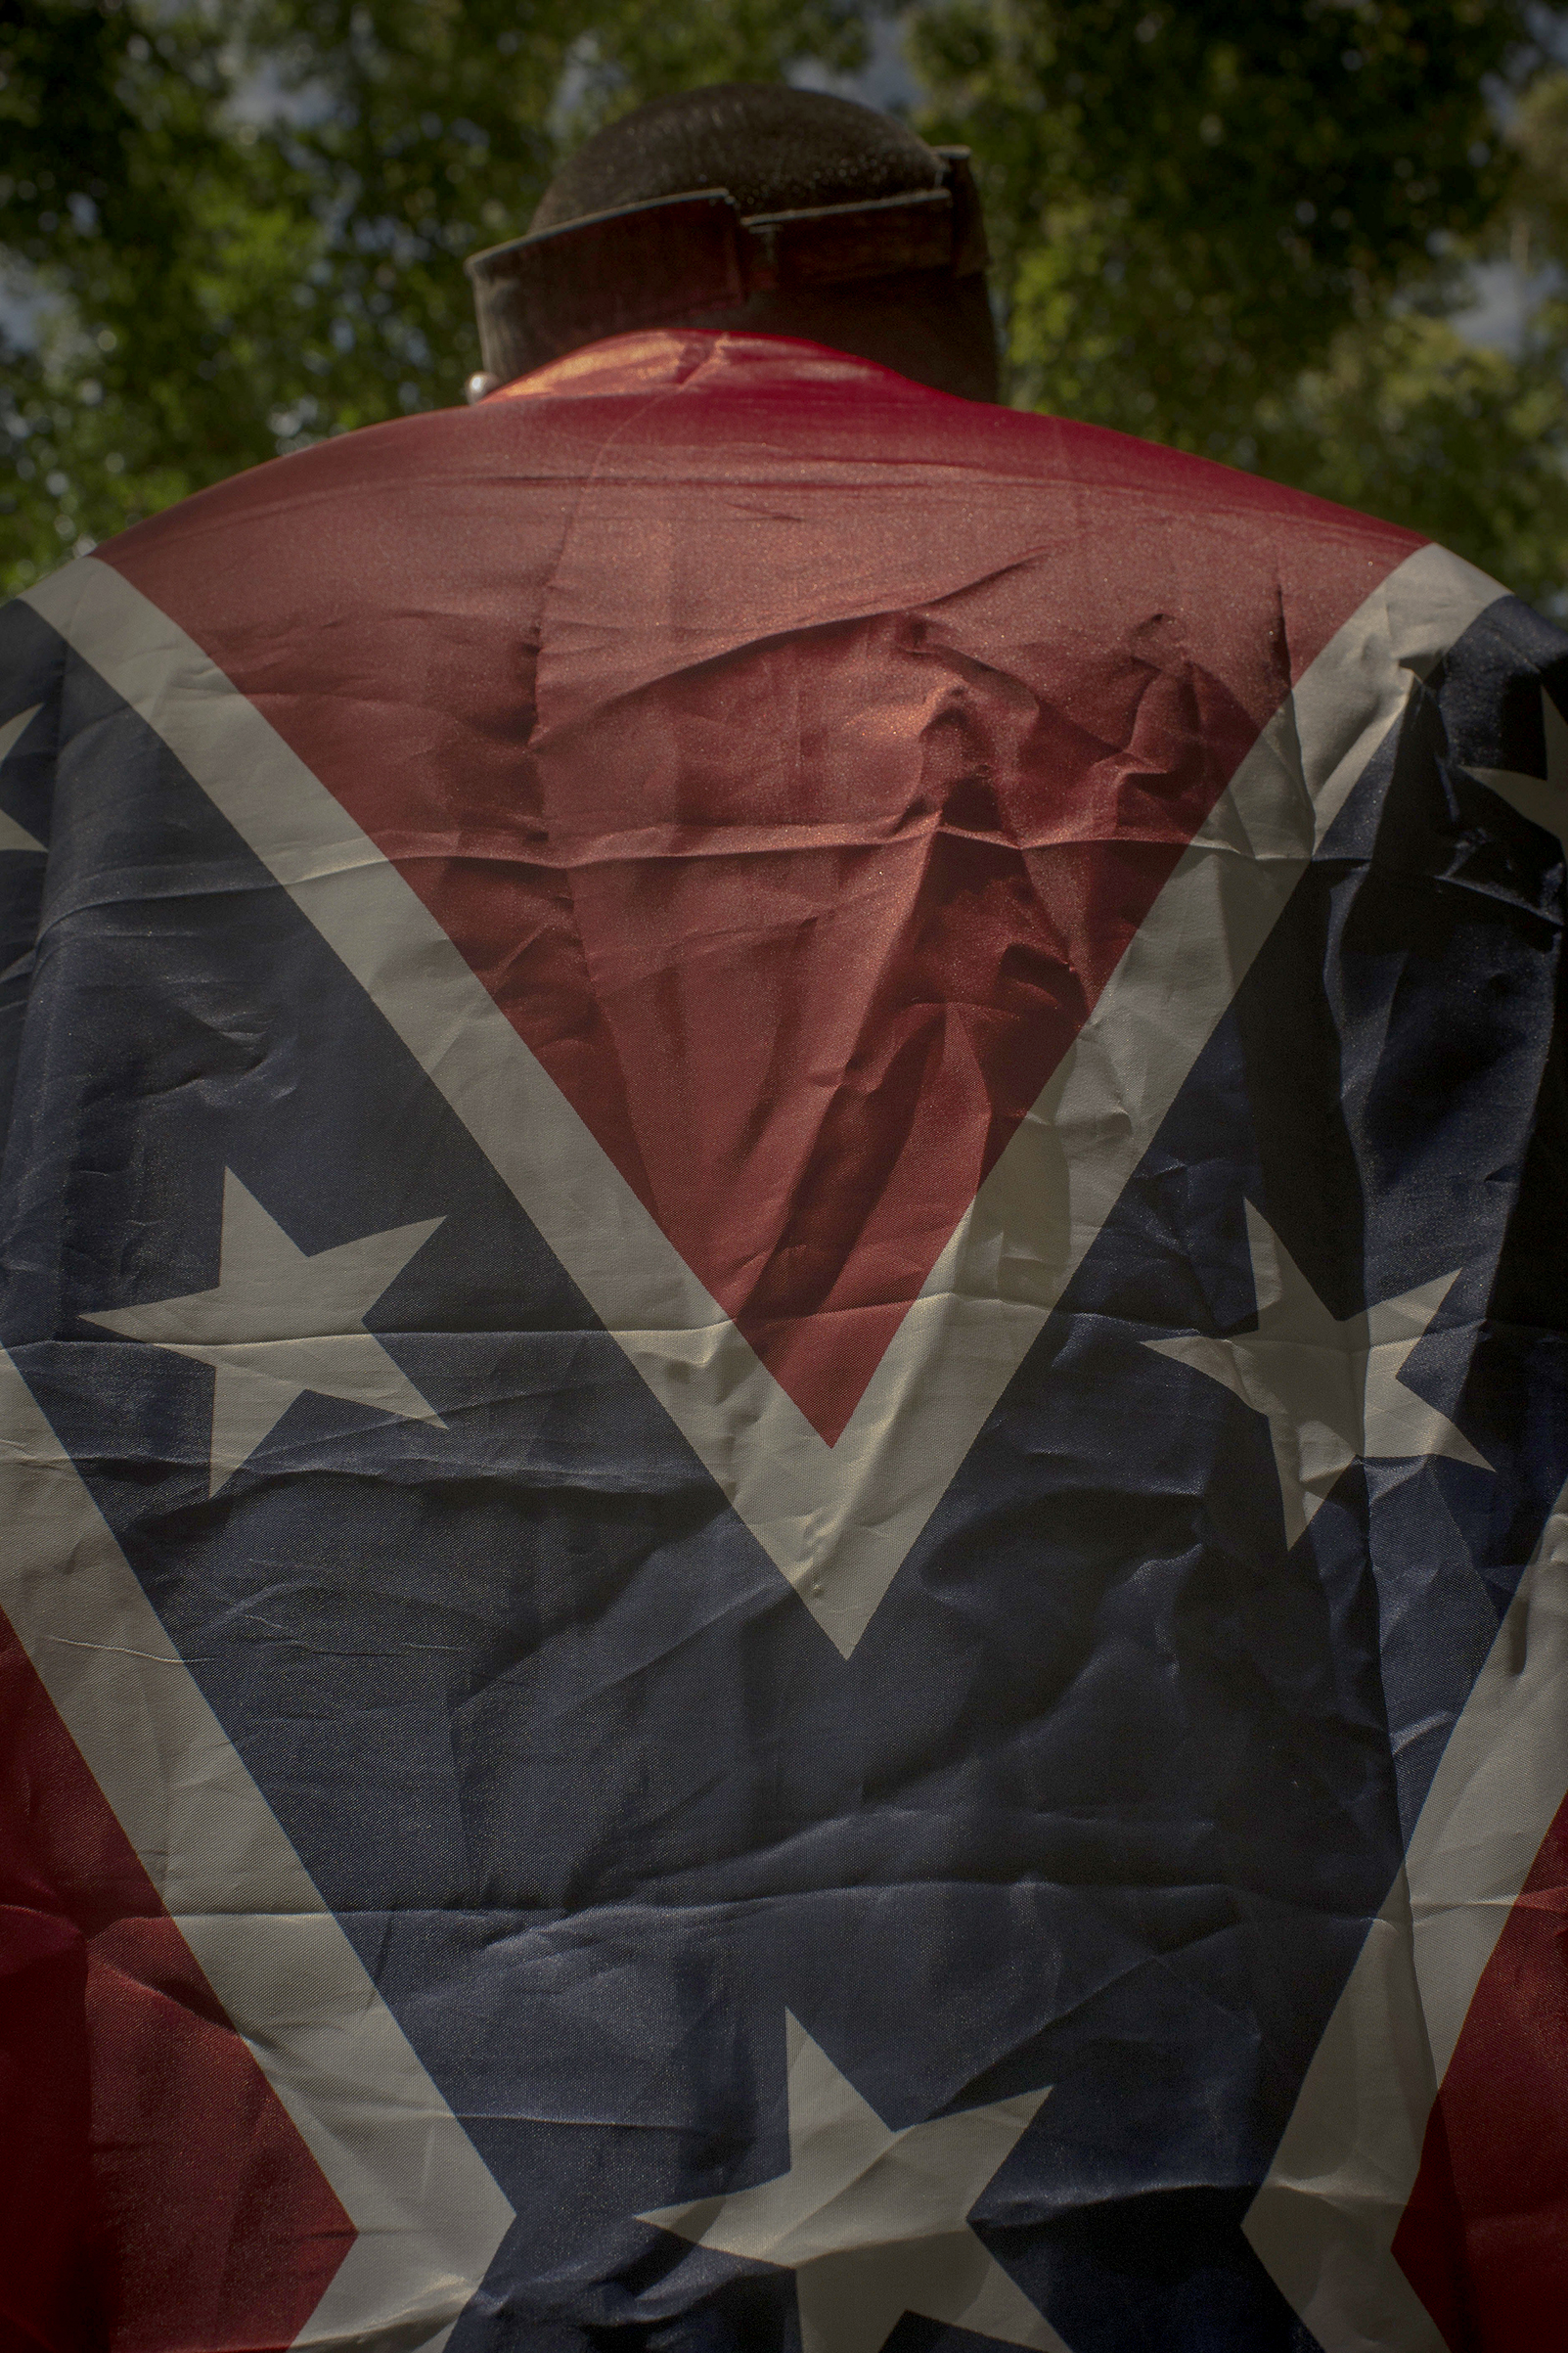 A Unite the Right protester drapes himself in a Confederate flag during a KKK rally in Charlottesville, Va., on July 8, 2017. (Gabriella Demczuk)